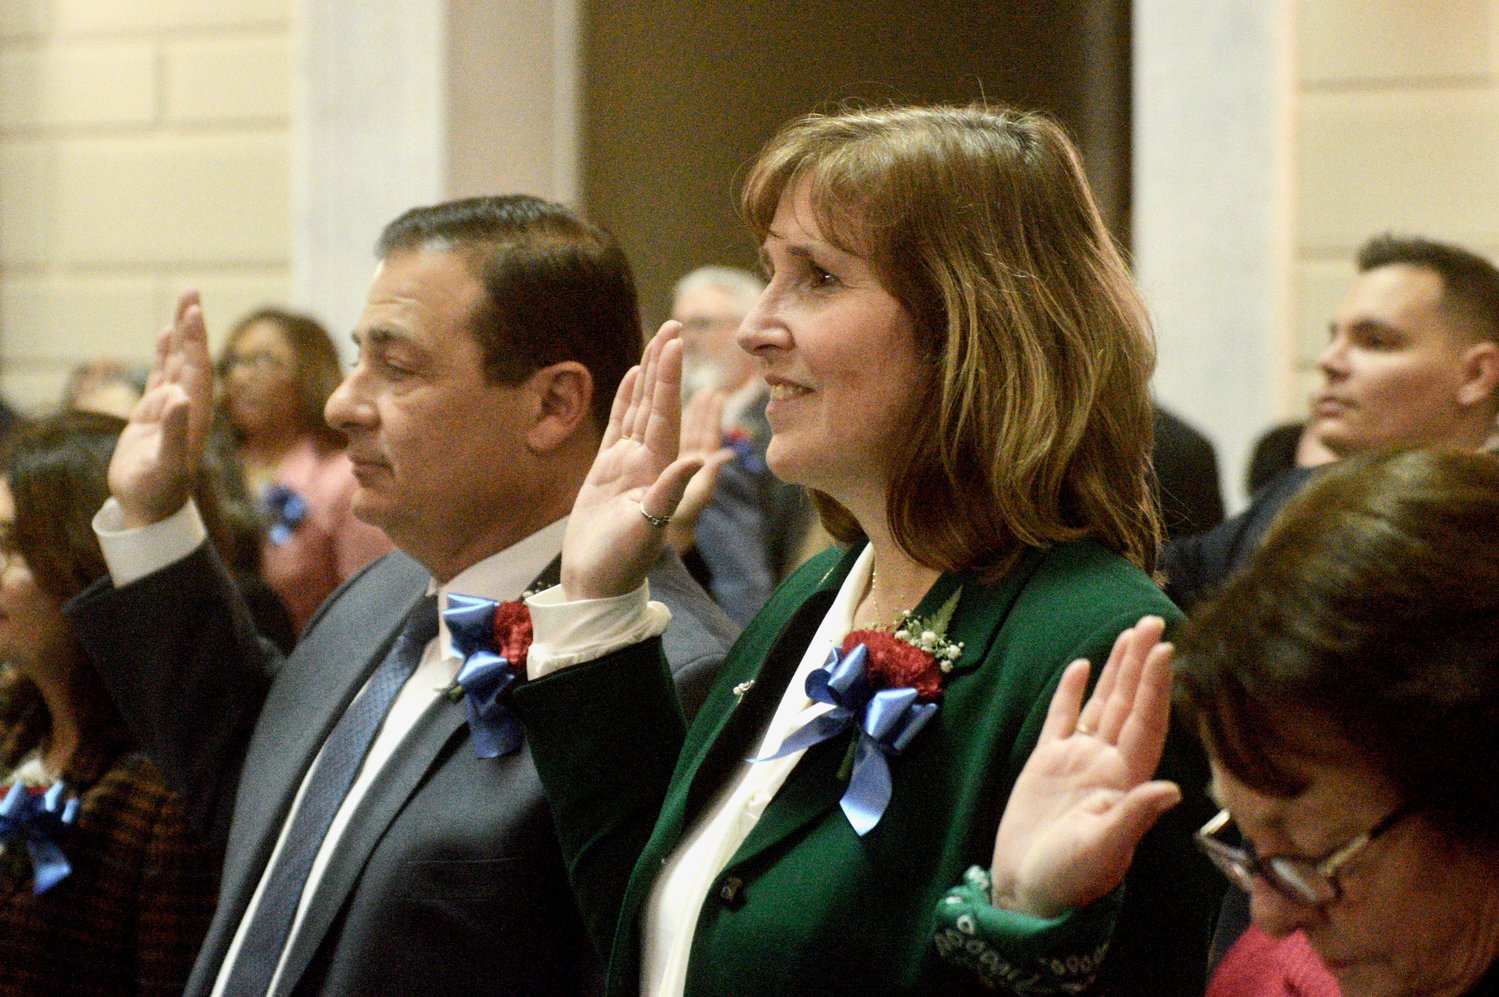 Rep. Michelle McGaw (D-Dist. 71) takes the oath of office to serve her second term in the House of Representatives. At left is Rep. K. Joseph Shekarchi of Warwick, who would be reelected as House speaker just minutes later.